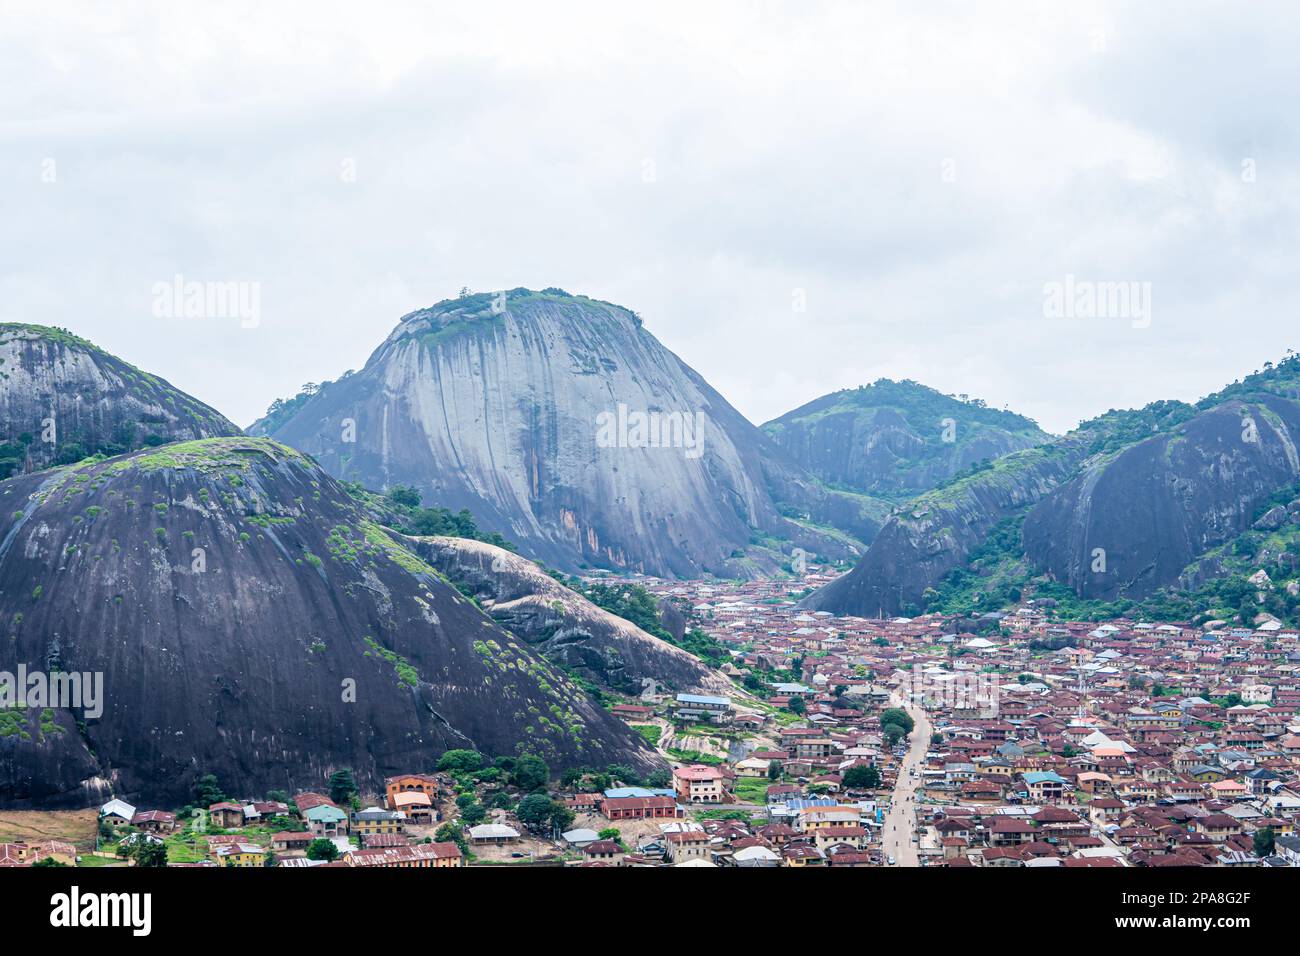 Idanre hill is one of the most awesome and beautiful natural landscapes in Ondo State, Nigeria. Stock Photo